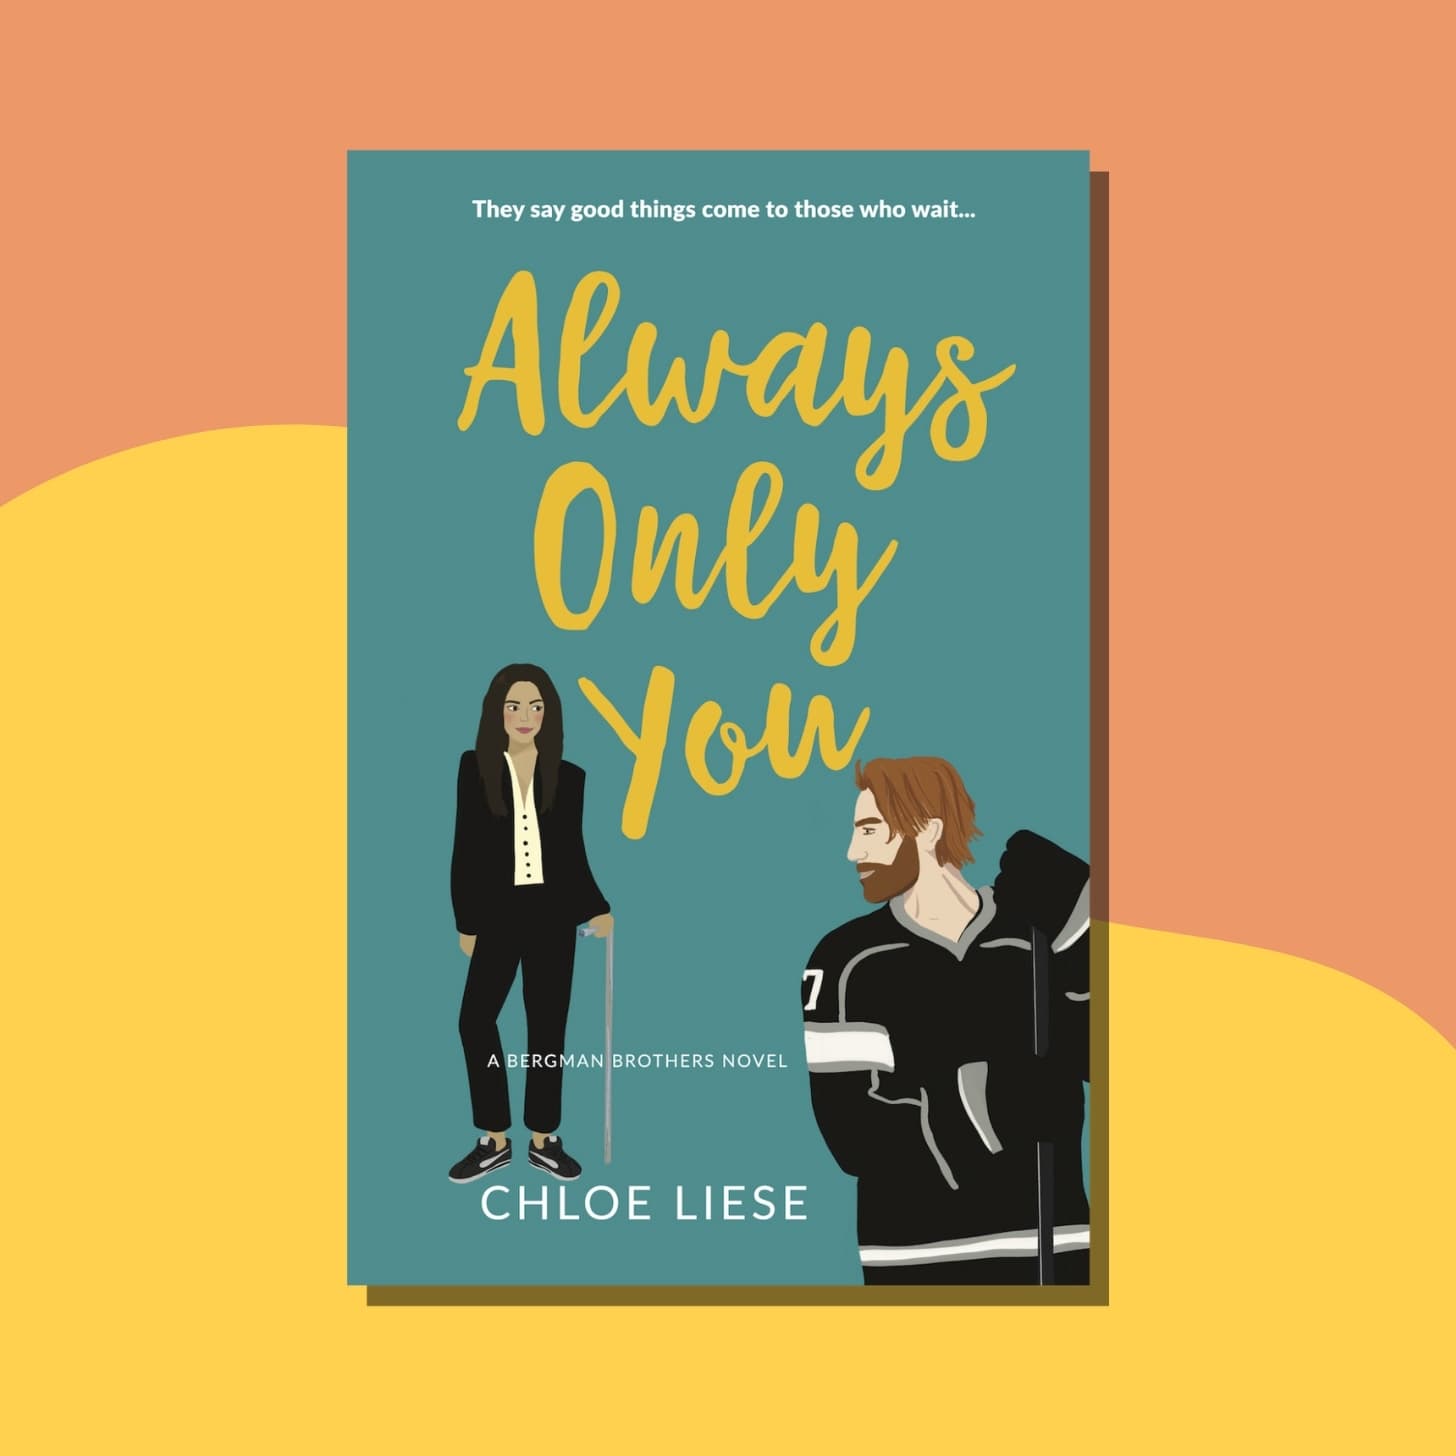 “Always Only You” by Chloe Liese - Cover has a woman in a suit with sneakers and a cane, and a man in a hockey uniform